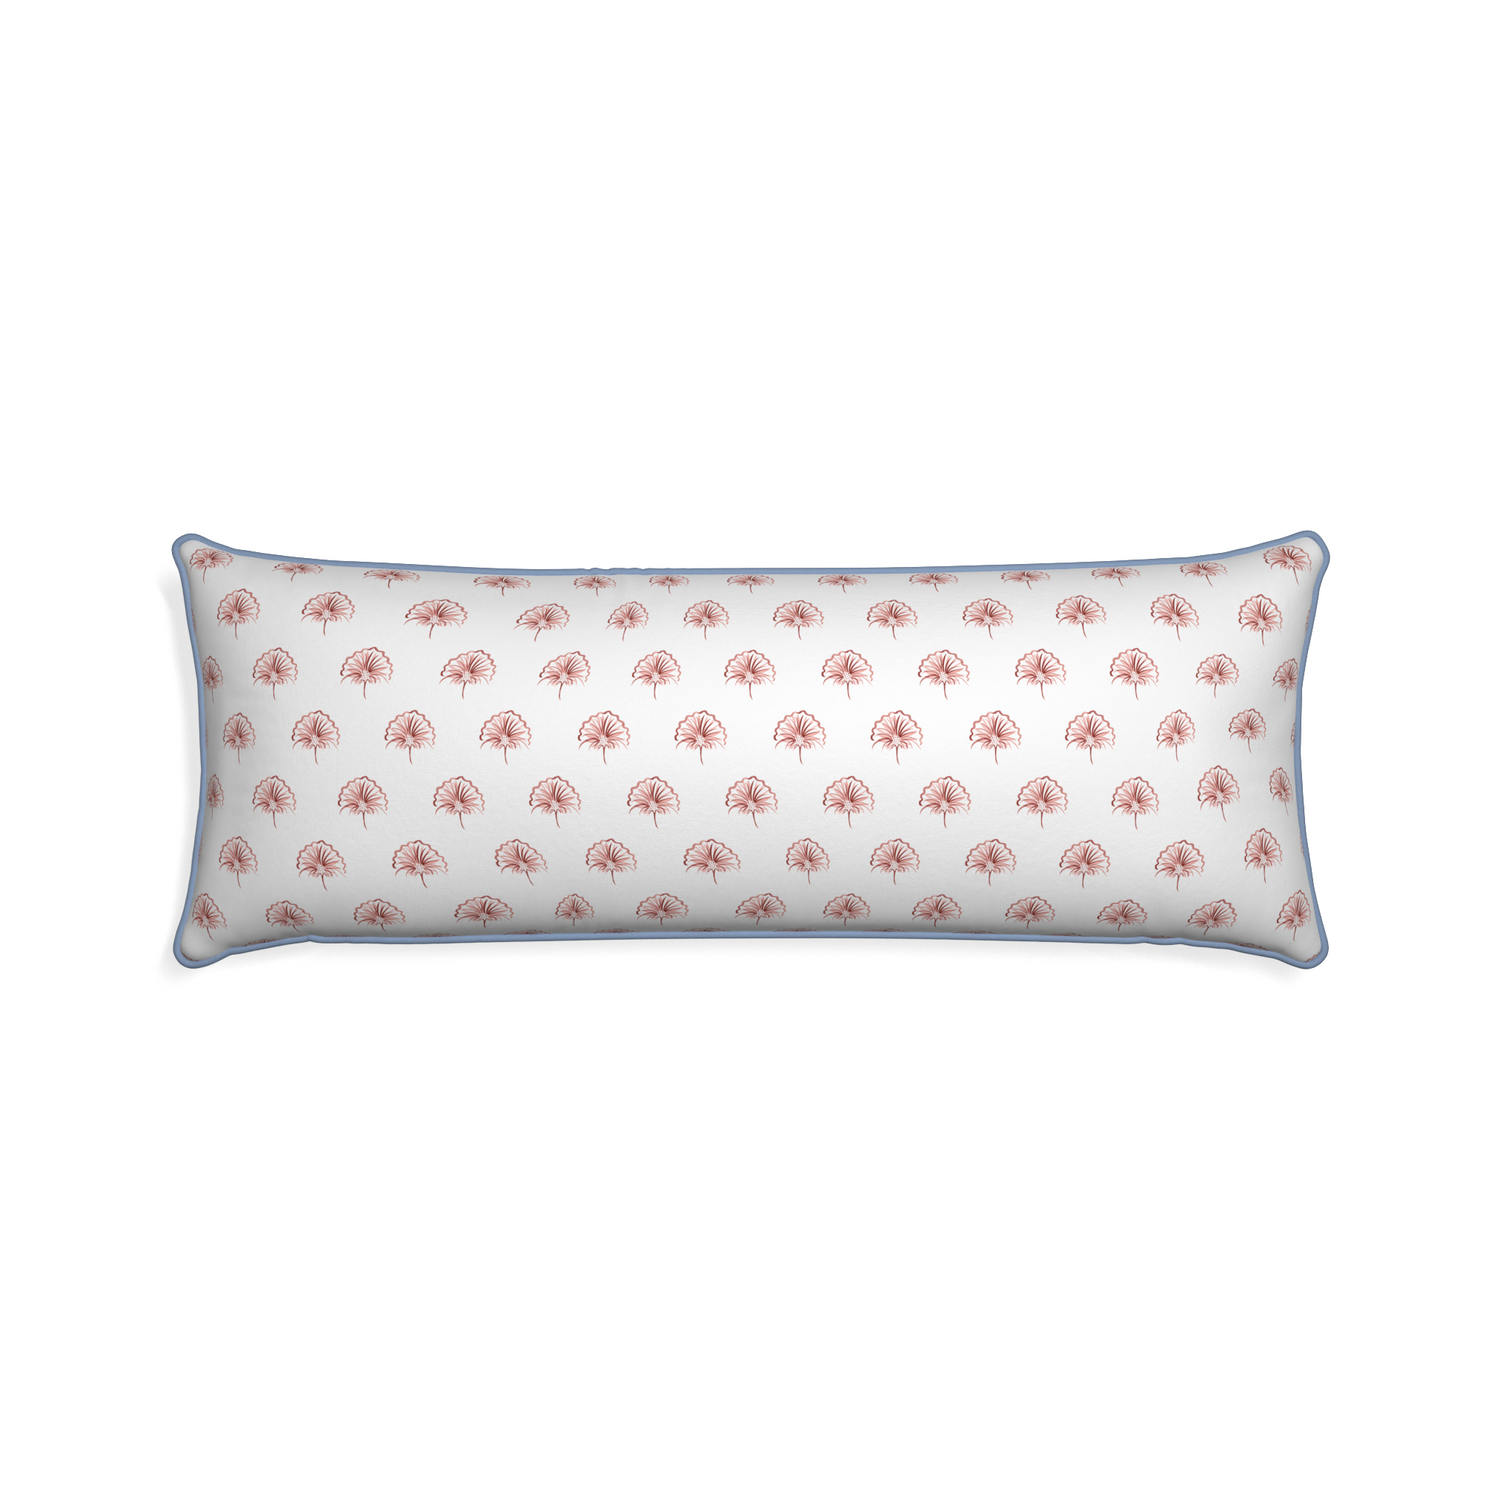 Xl-lumbar penelope rose custom pillow with sky piping on white background